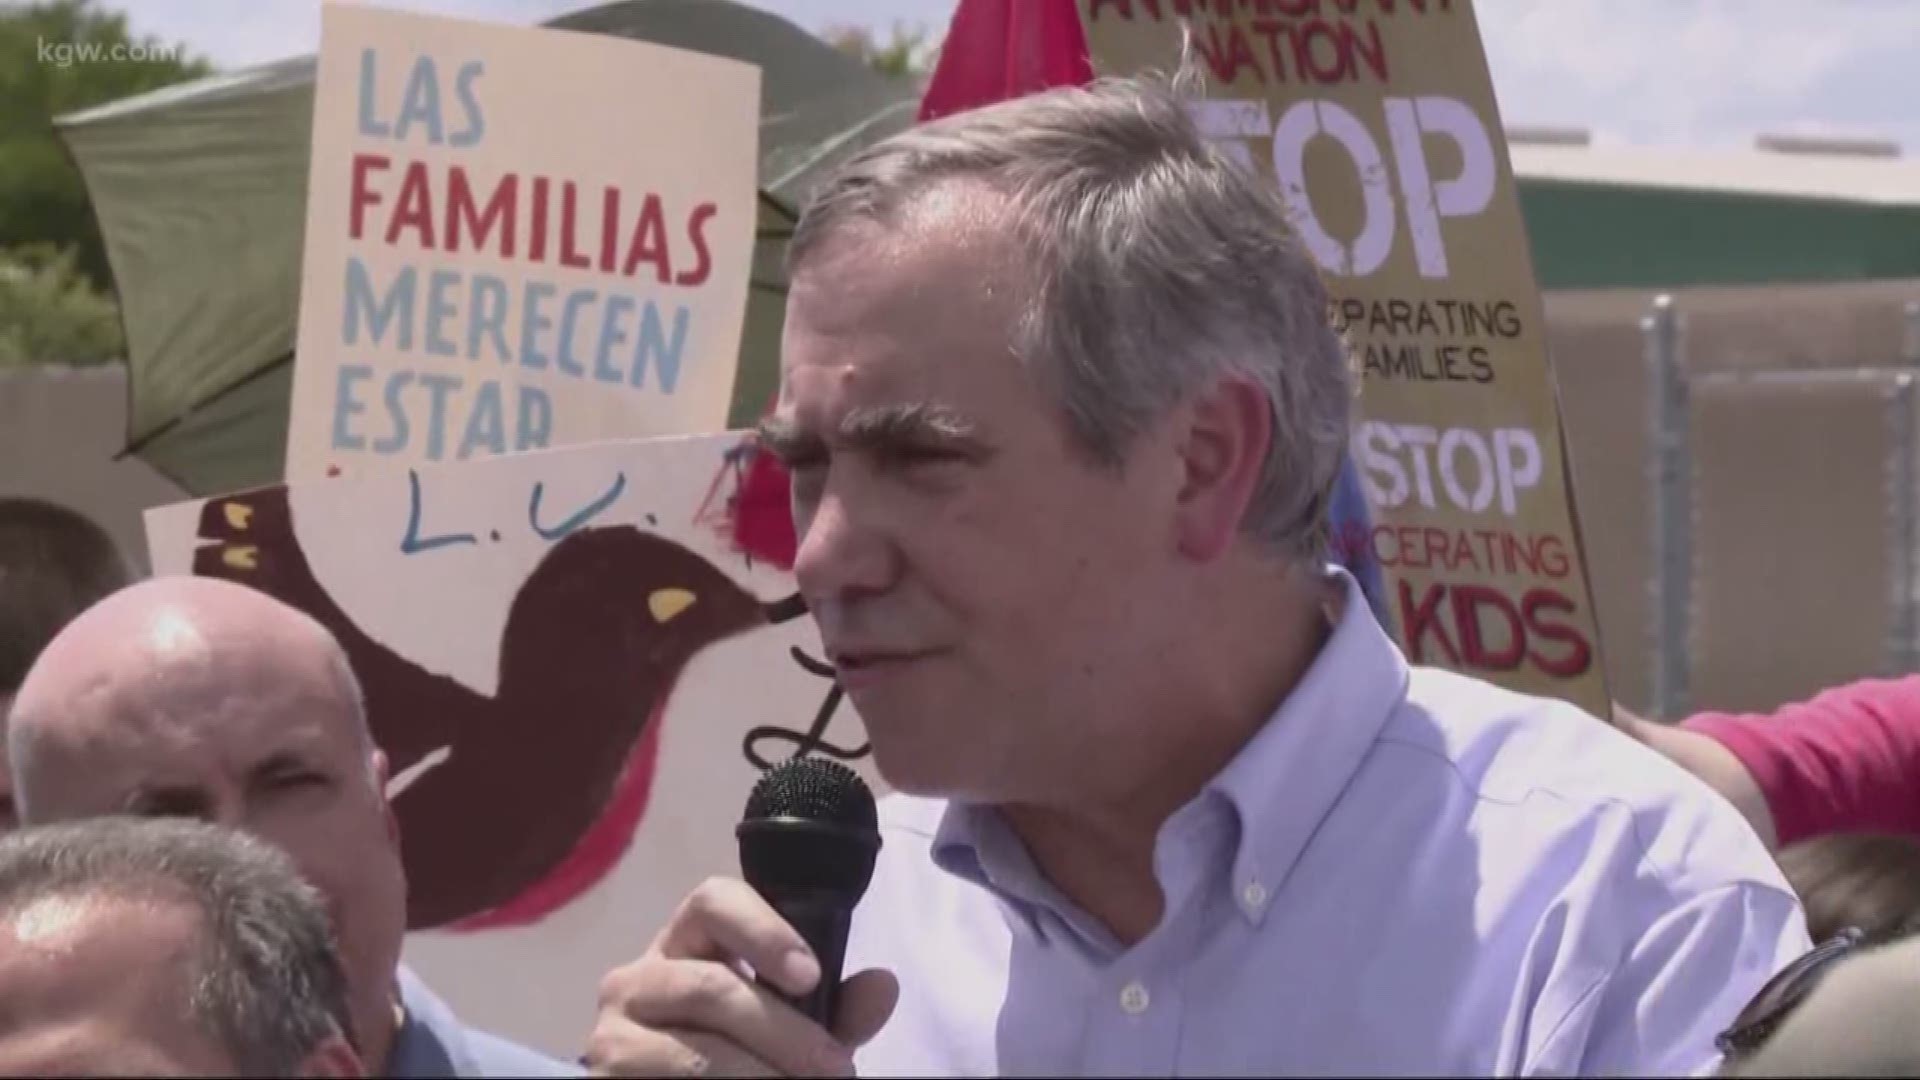 Oregon Senator Jeff Merkley is back in Texas. On Sunday, he returned to a detention center in south Texas where hundreds of migrant children separated from their families are being held.